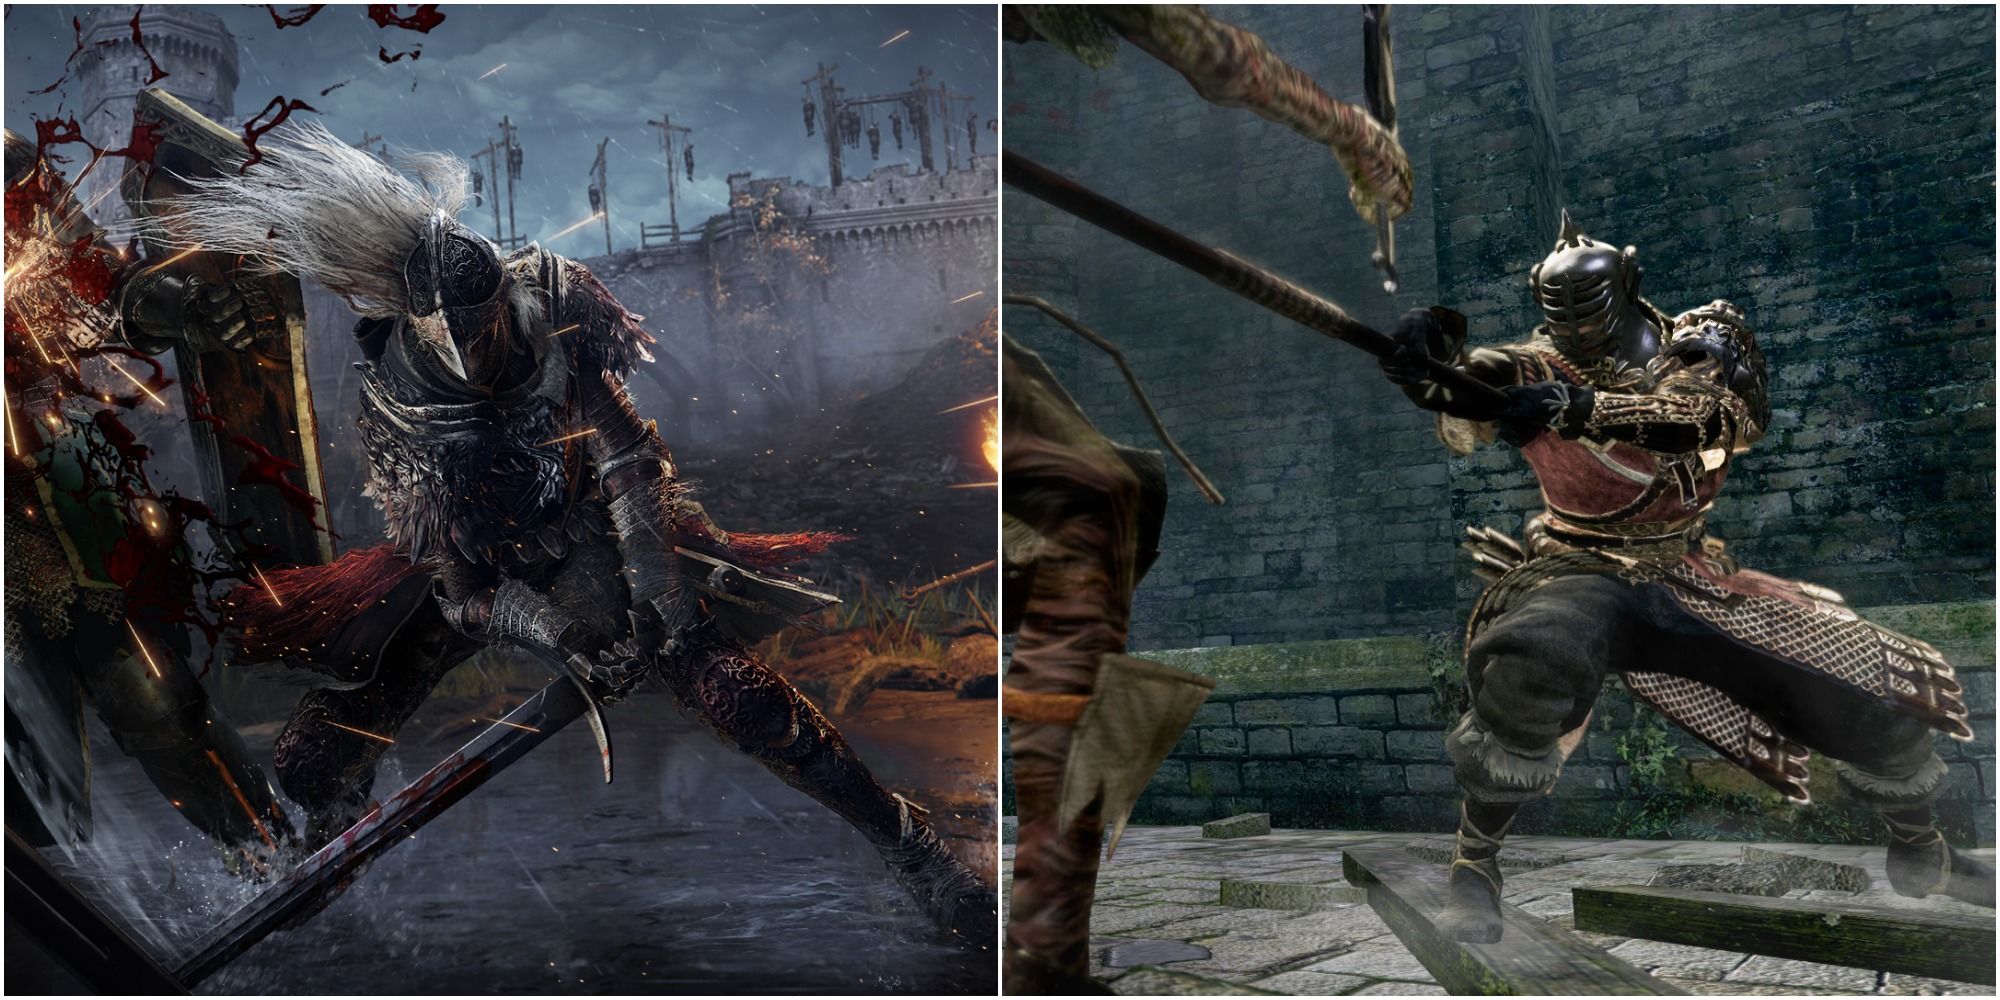 Ring Vs Dark Souls: 10 Things The Games Have In Common